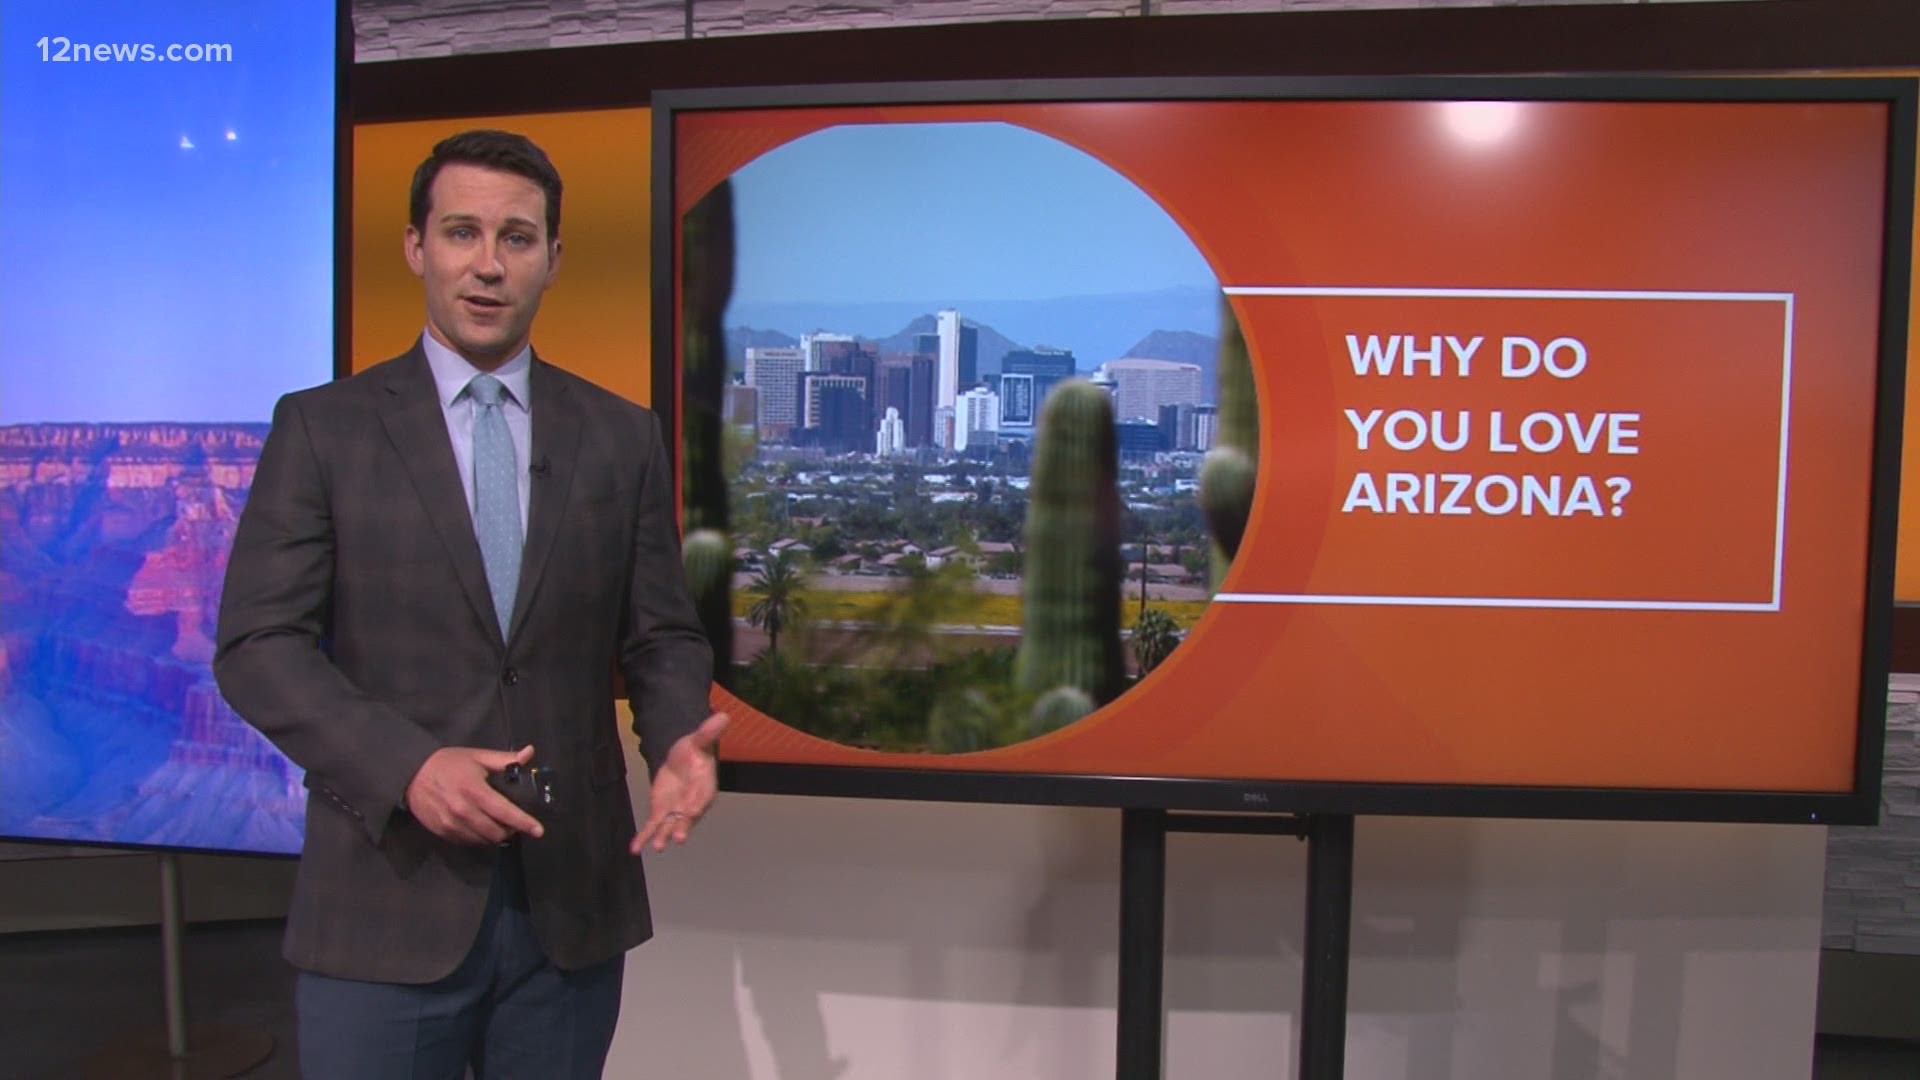 A recent ranking by U.S. News and World Report has Arizona as the 39th best state in the country. Do you agree?